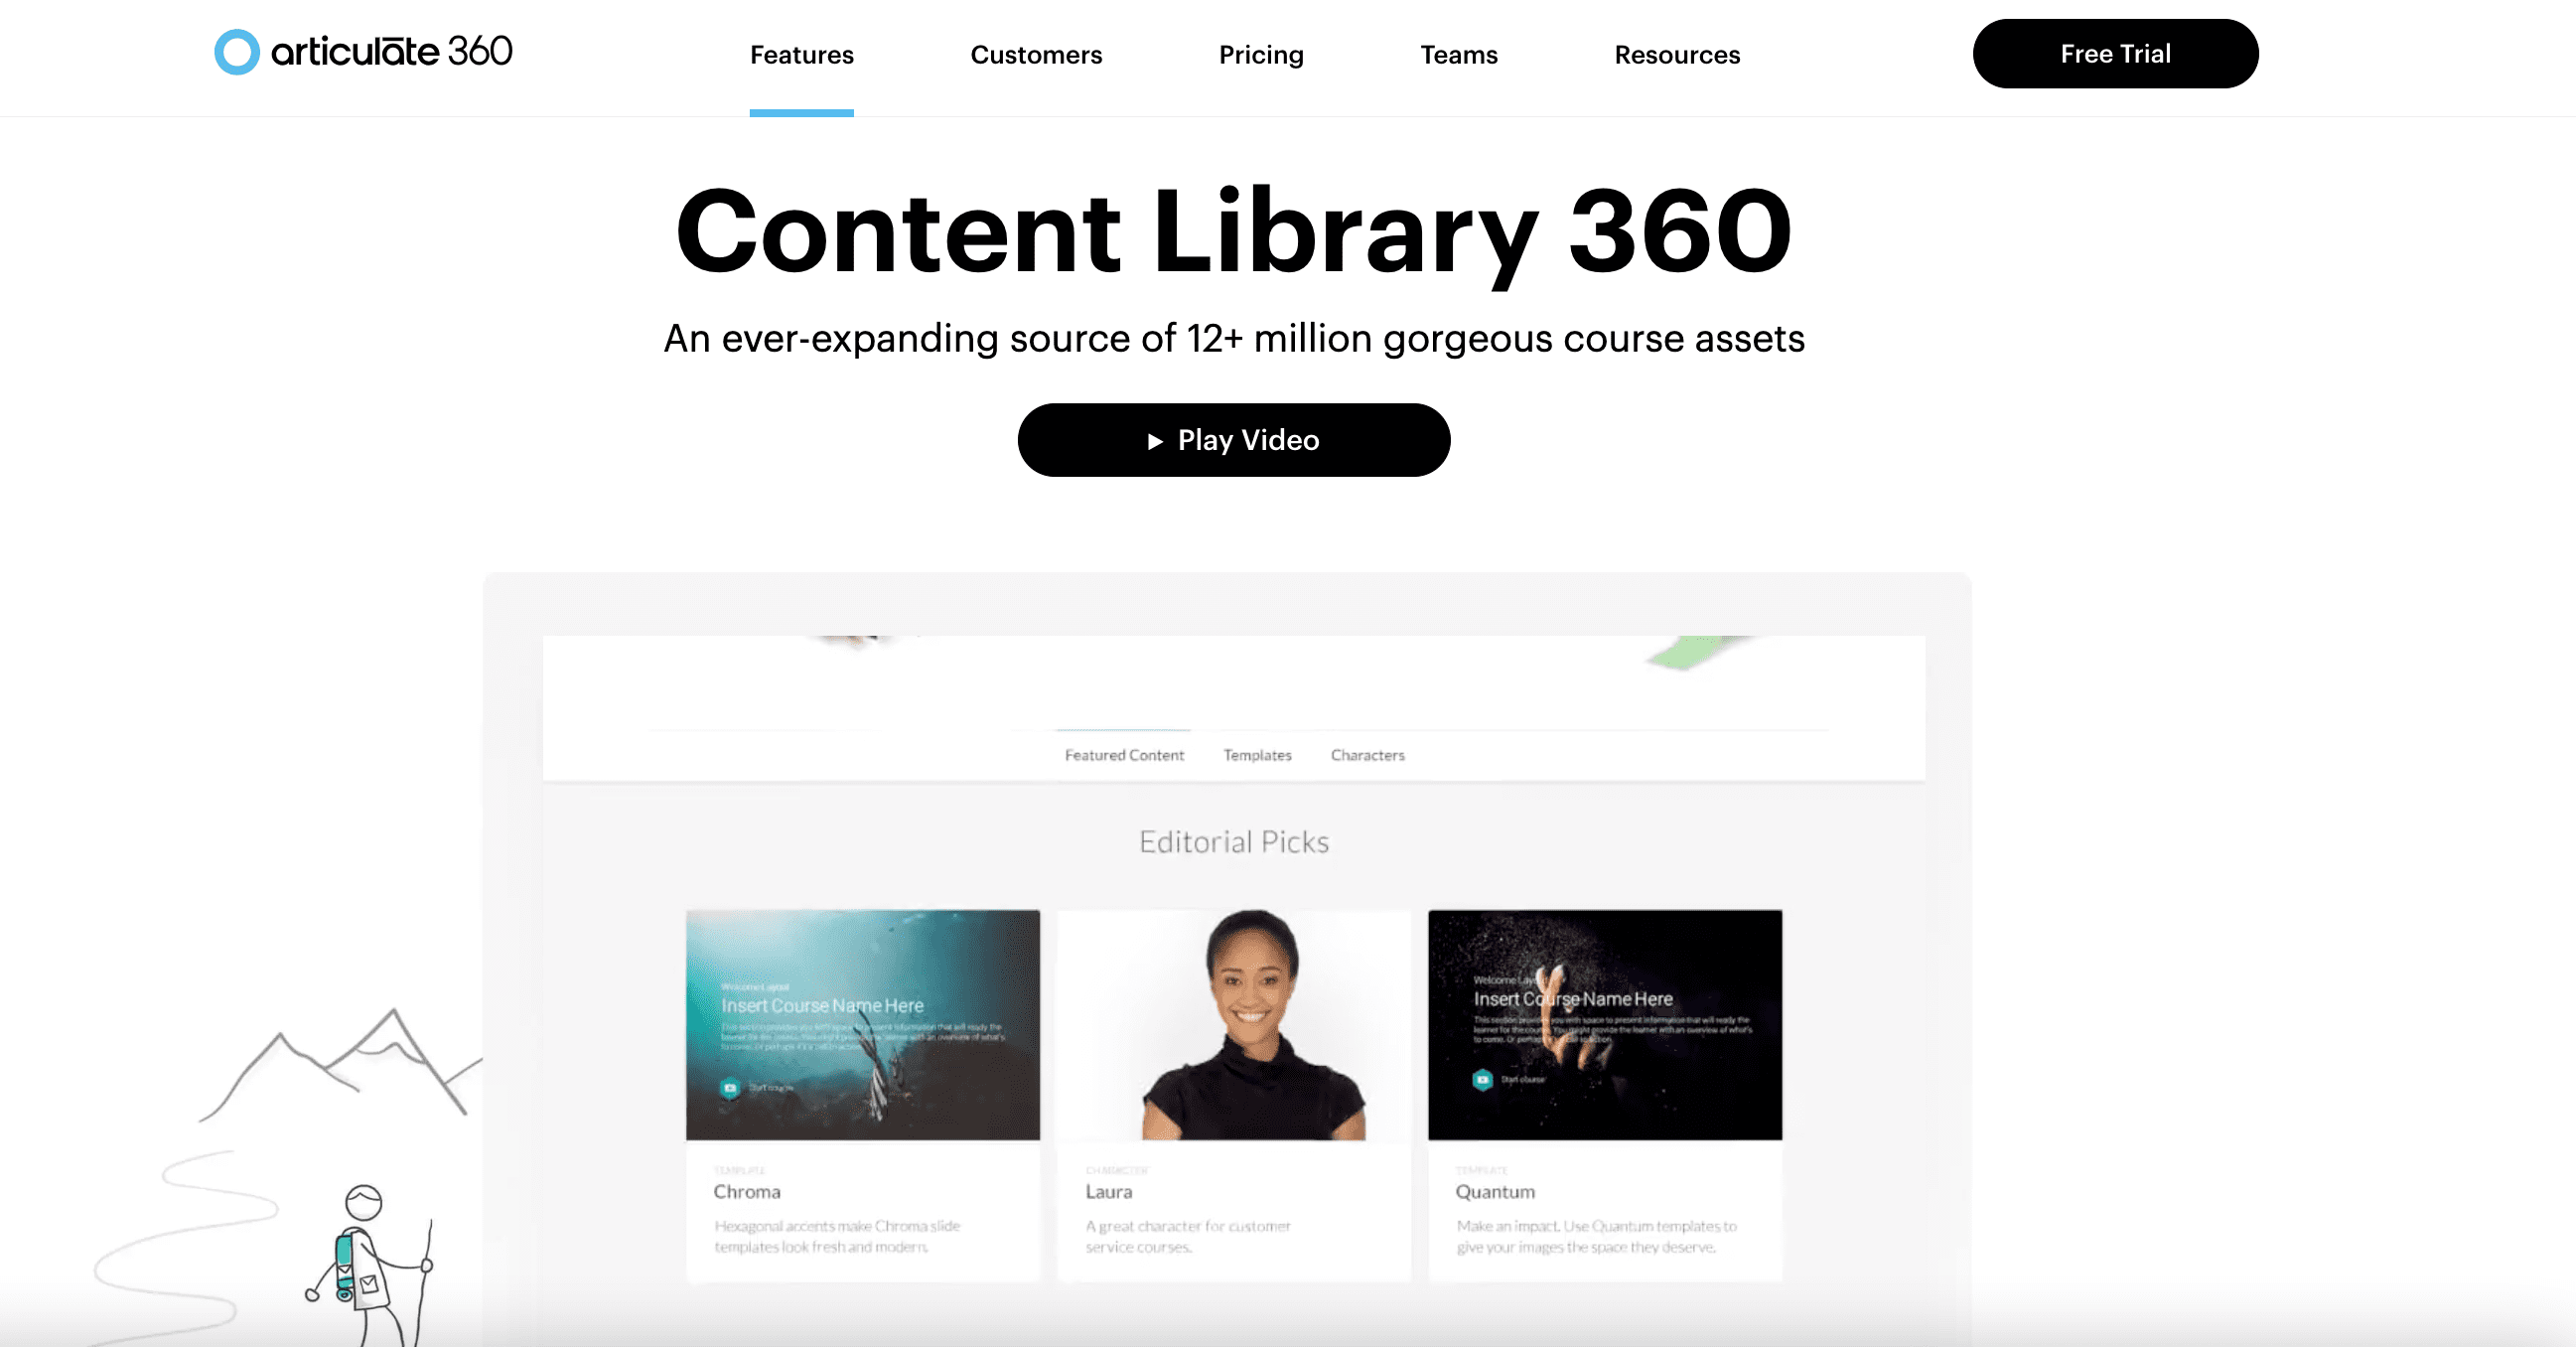 Articulate 360 with Content Library 